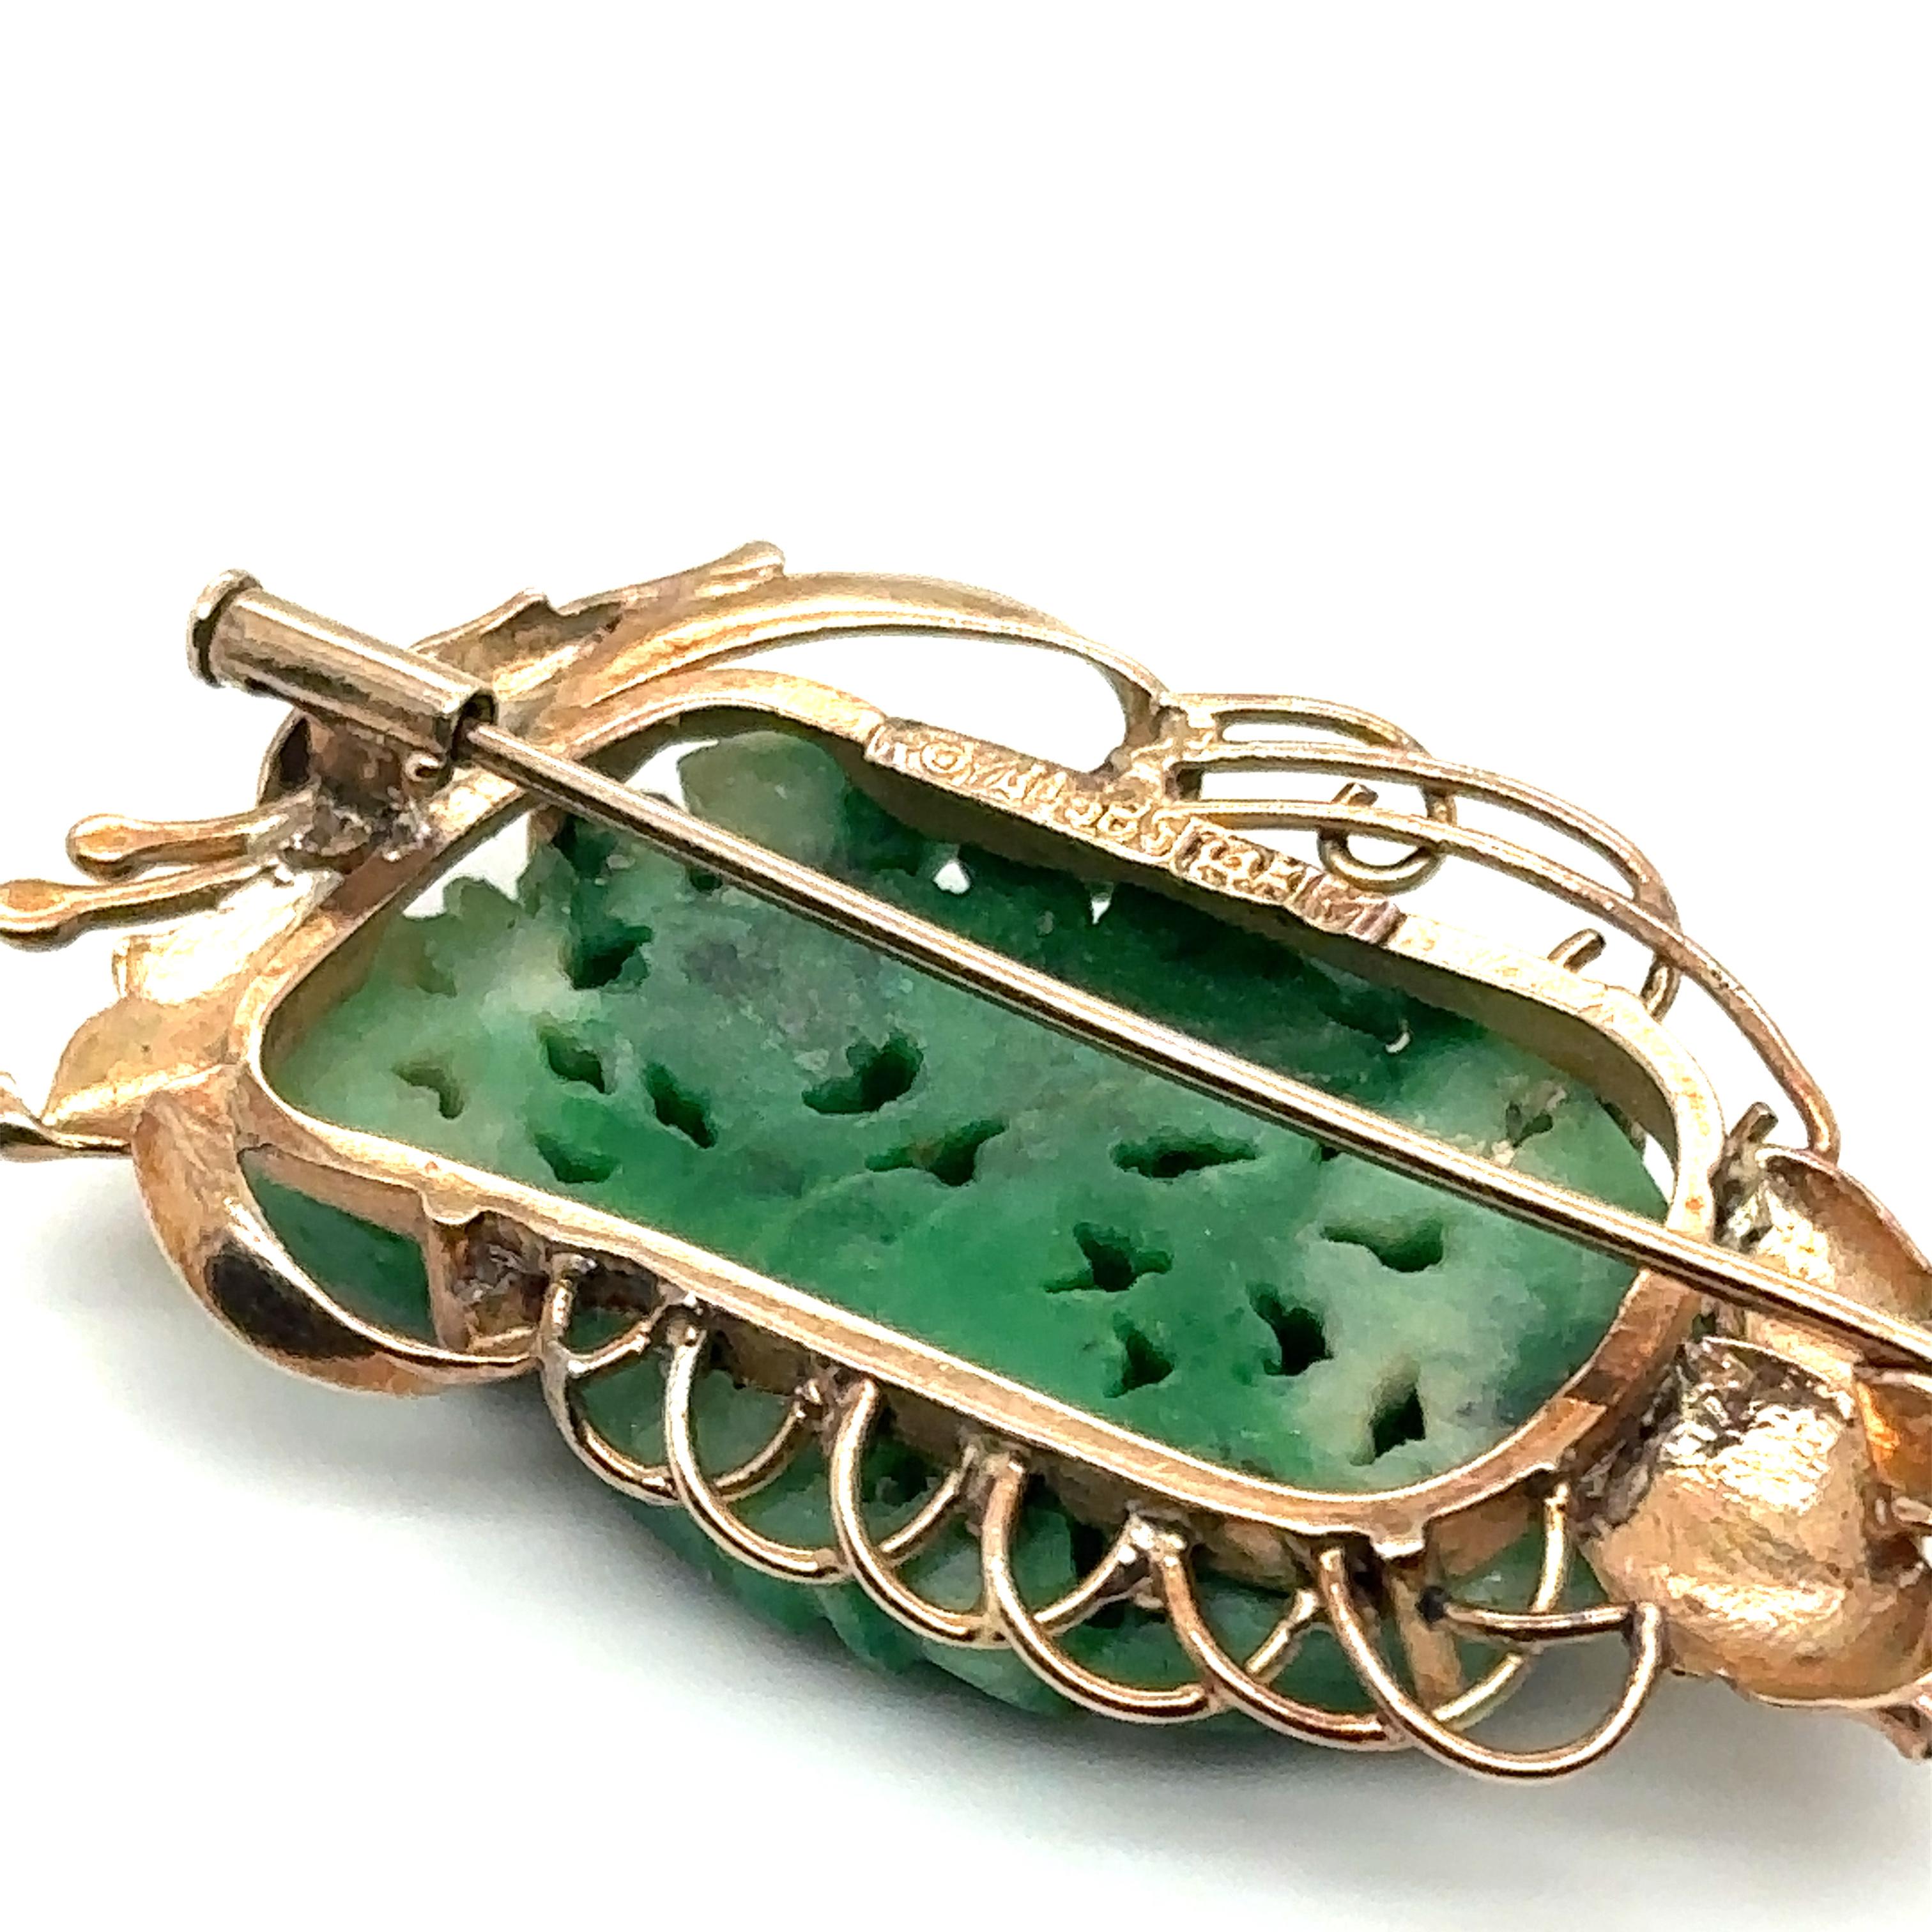 Item Details: This brooch, originating from Victorian Asia, features a beautiful green carved jade and a decorated gold design.

Circa: 1890s
Metal Type: 14 Karat Yellow Gold
Weight: 9.2 grams
Size: 1.75 inch Width 

Hallmarked: 